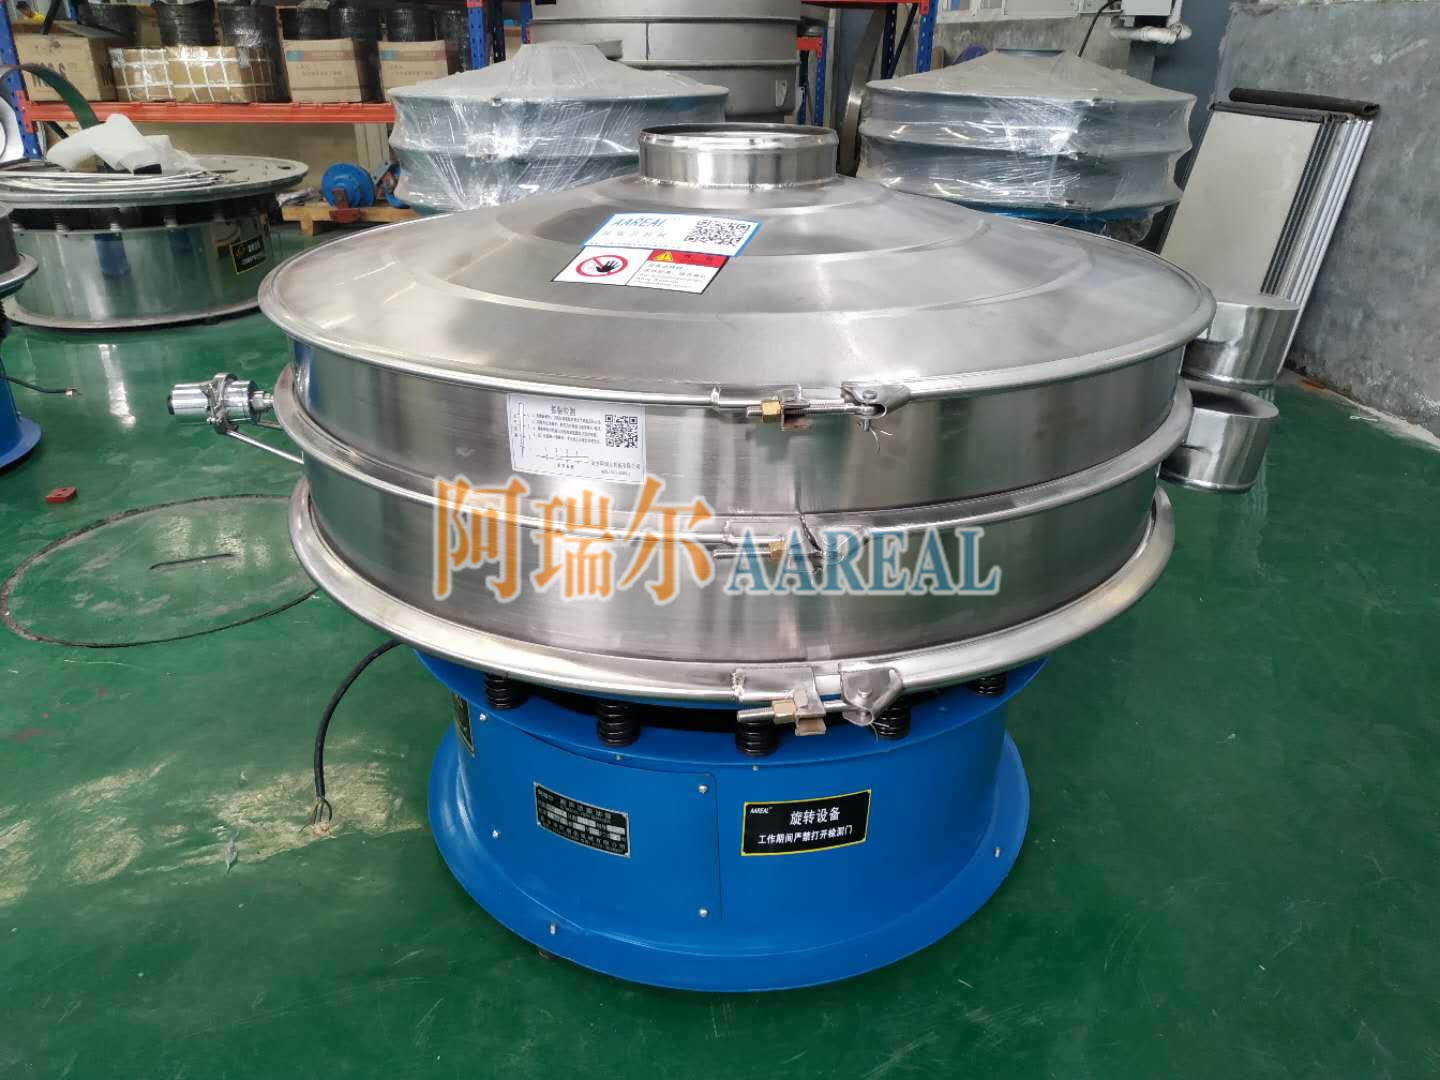 1200mm Single-layer Stainless Steel Ultrasonic Vibrating Screen for Powder Coating